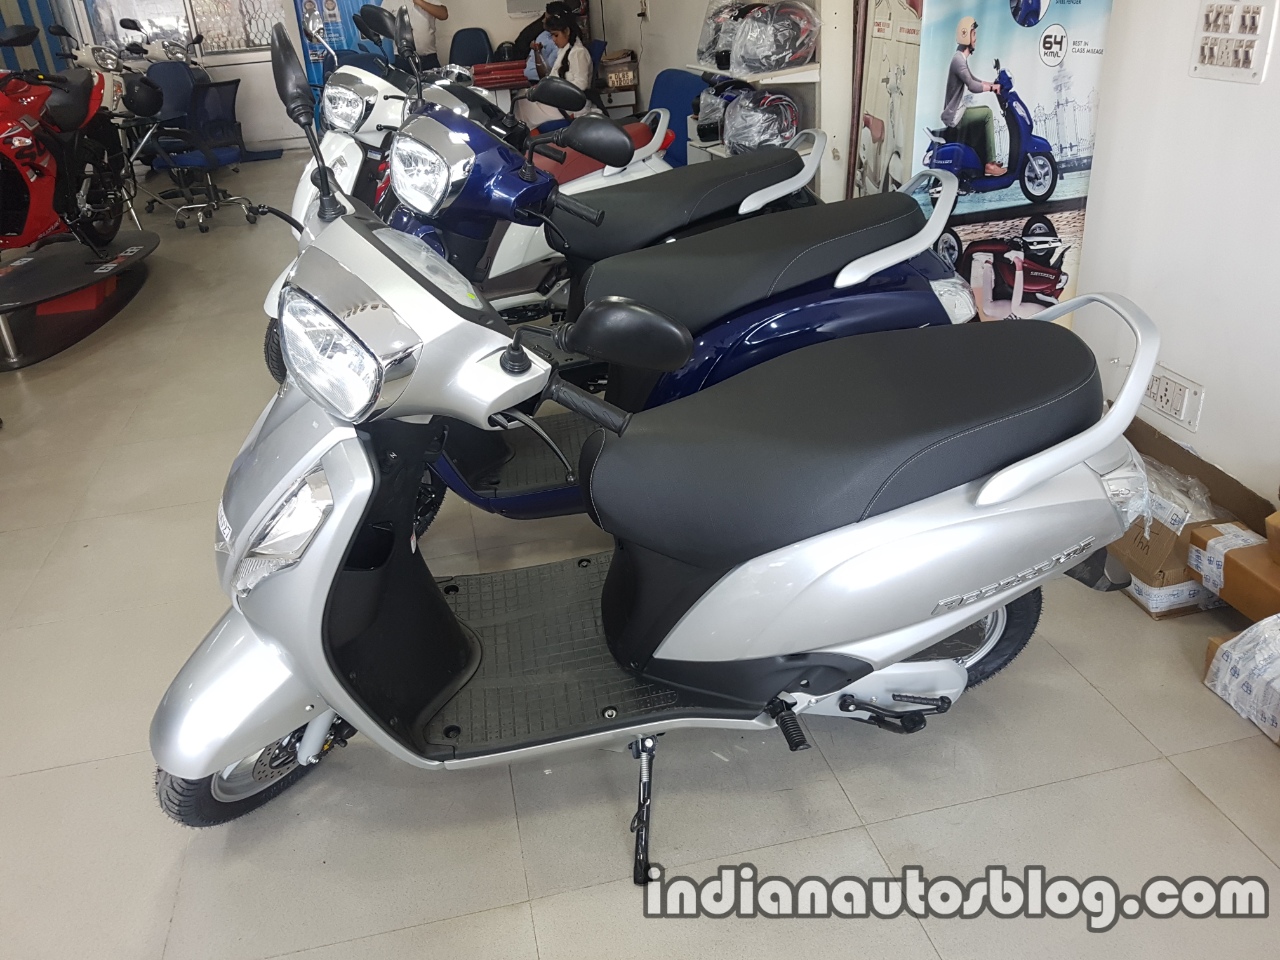 First Suzuki electric scooter in India to be launched in 2021 Report